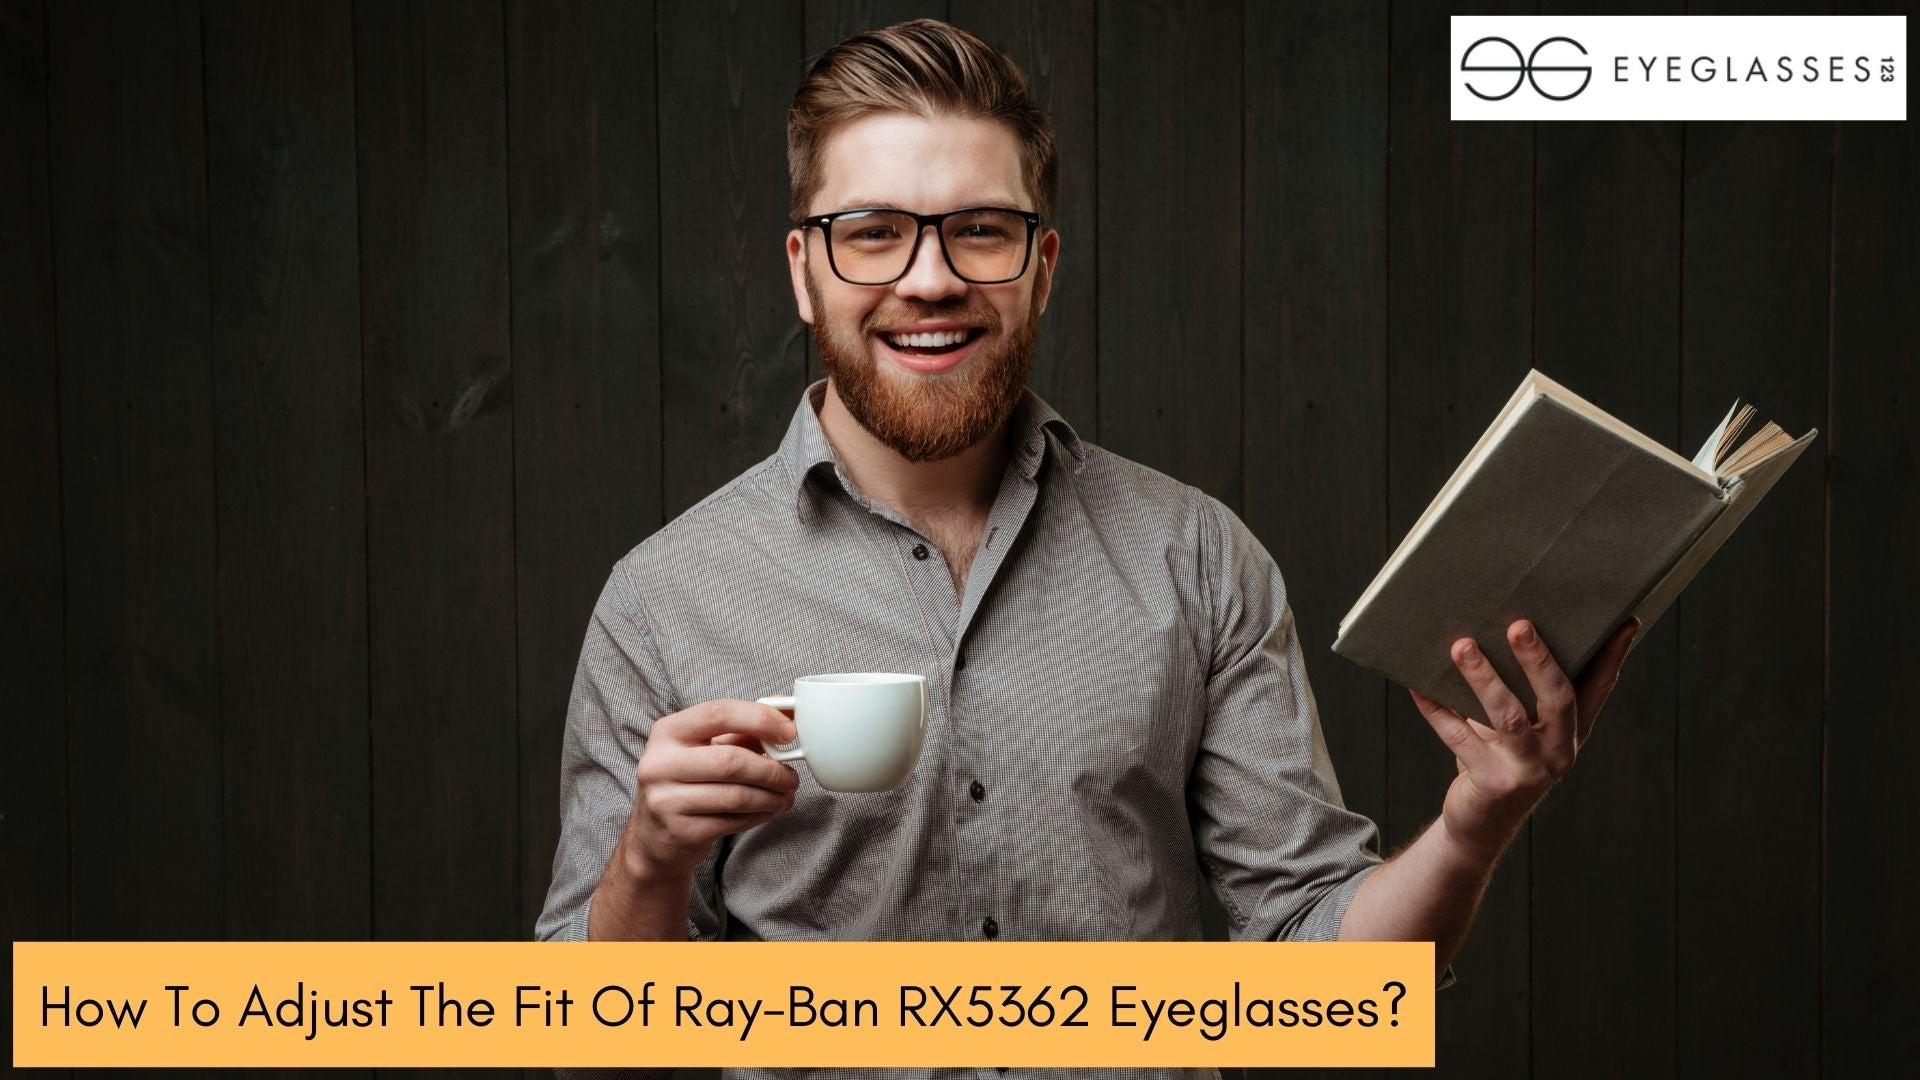 How To Adjust The Fit Of Ray-Ban RX5362 Eyeglasses?